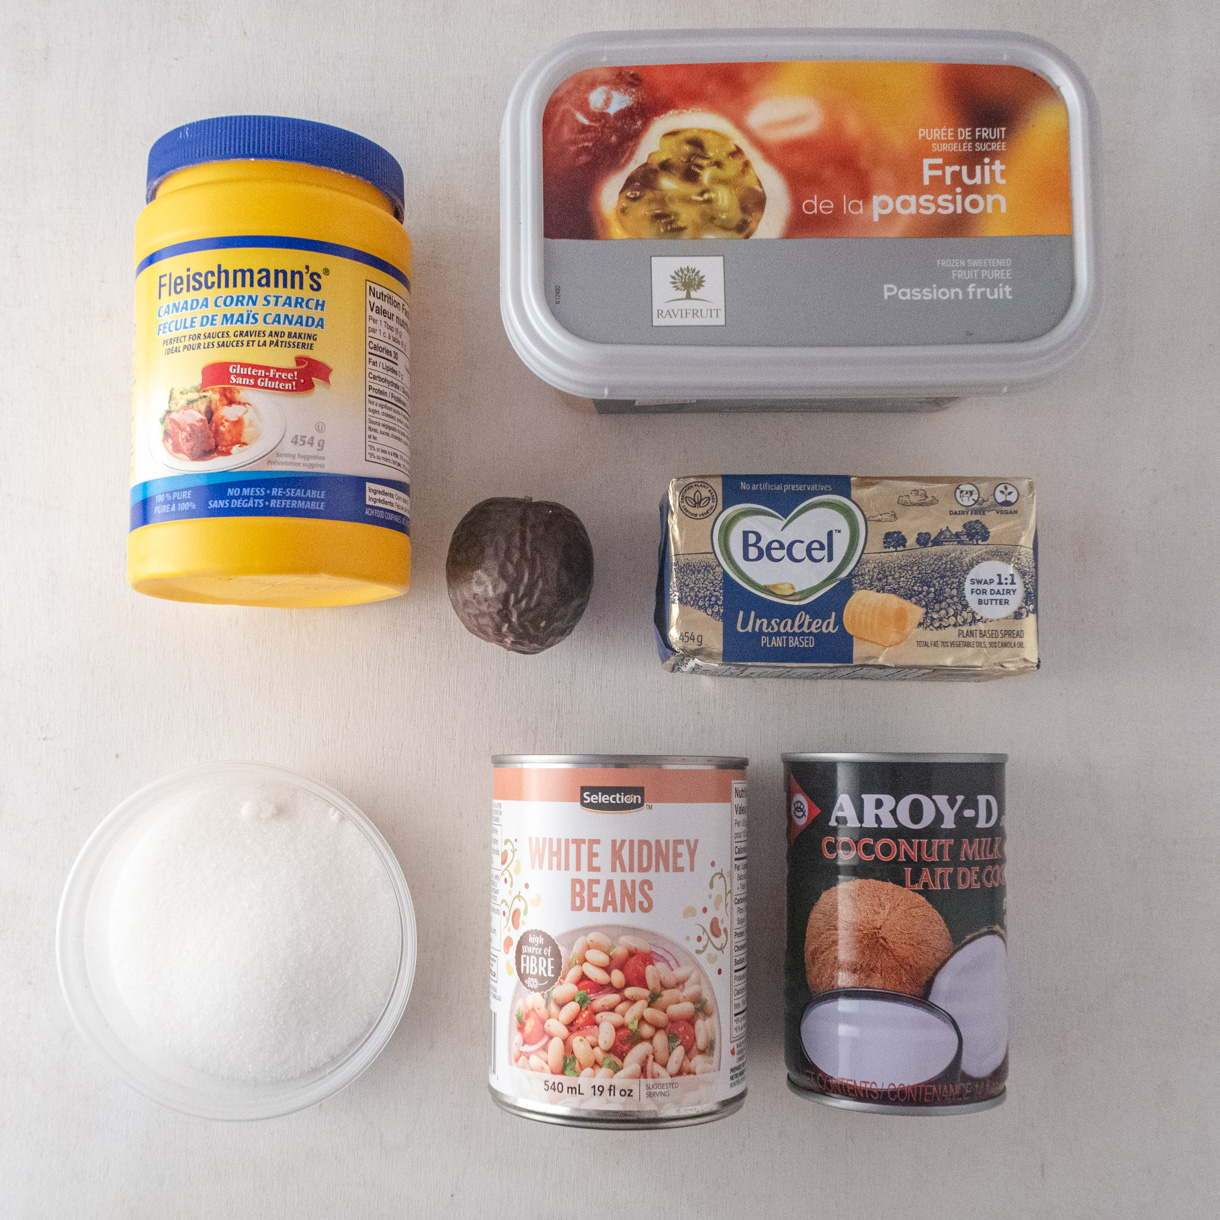 The ingredients needed for this recipe placed on a white background.